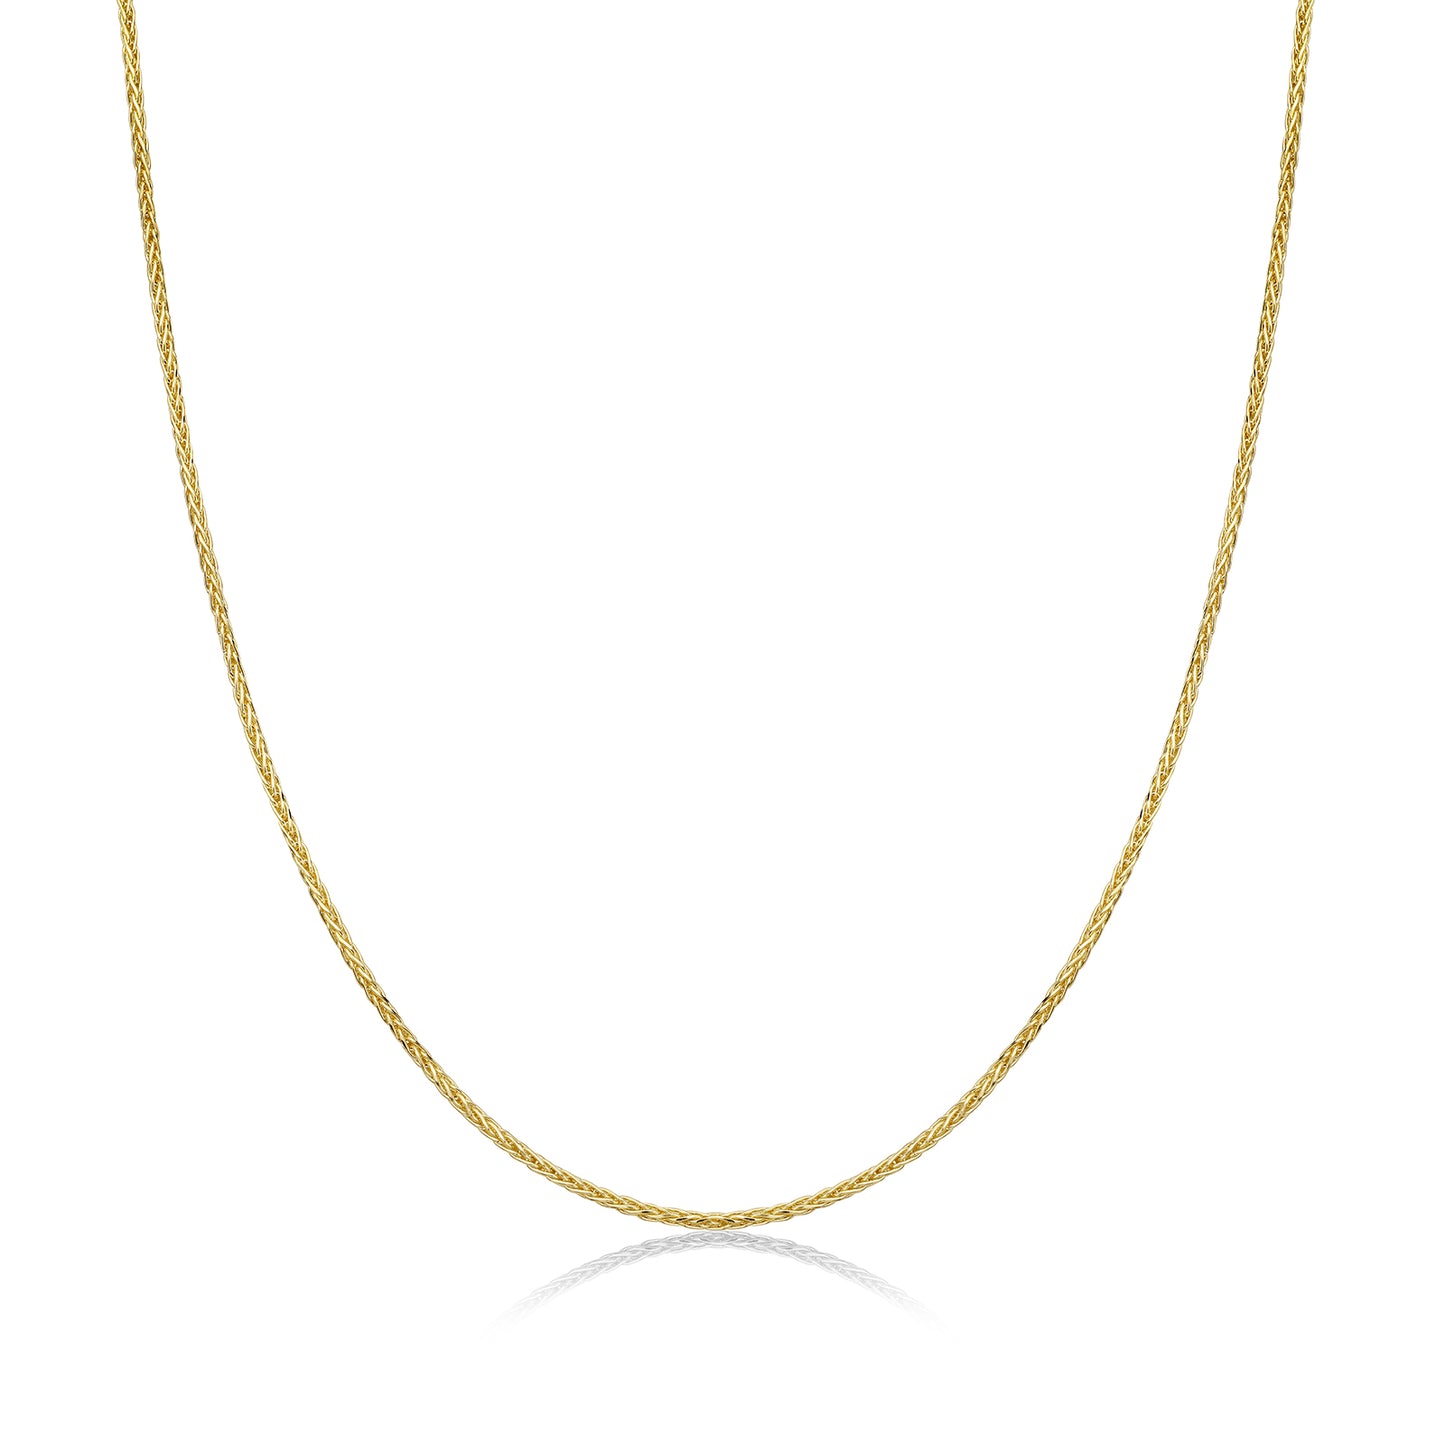 14k gold Wheat Chain Necklace